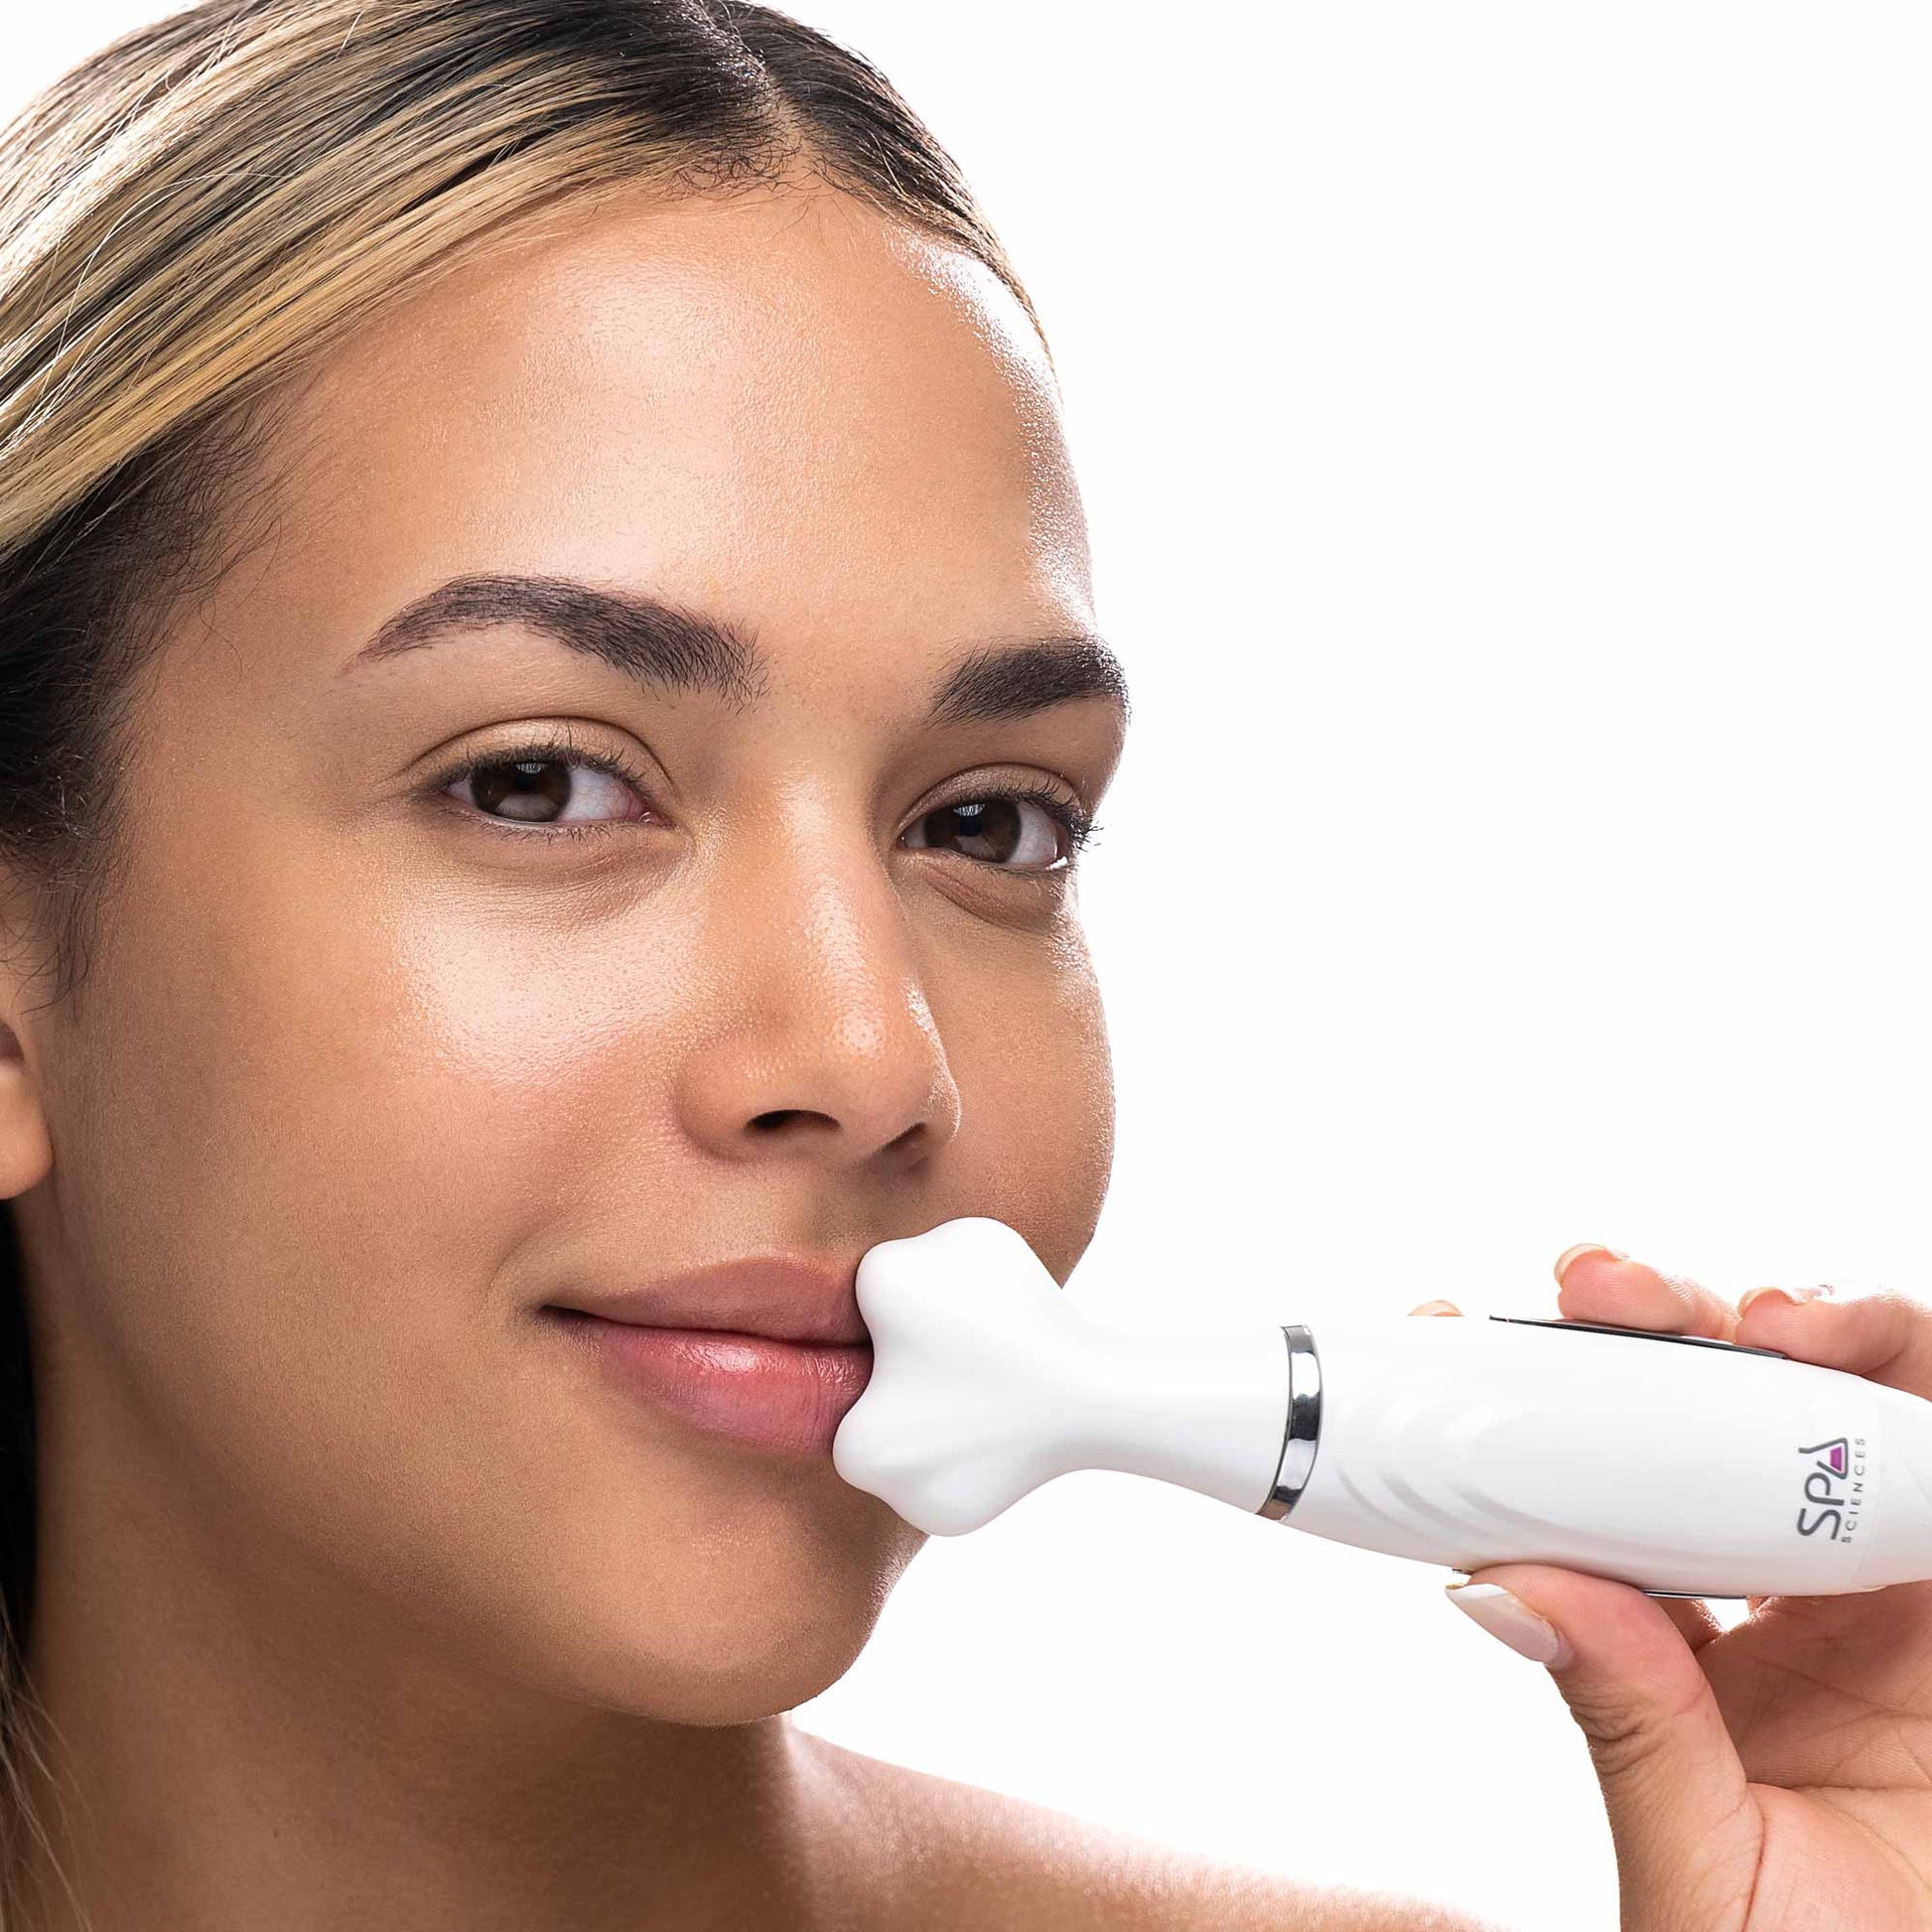 A woman is using a LORI Sonic Wand by Spa Sciences to promote blood circulation on her face.